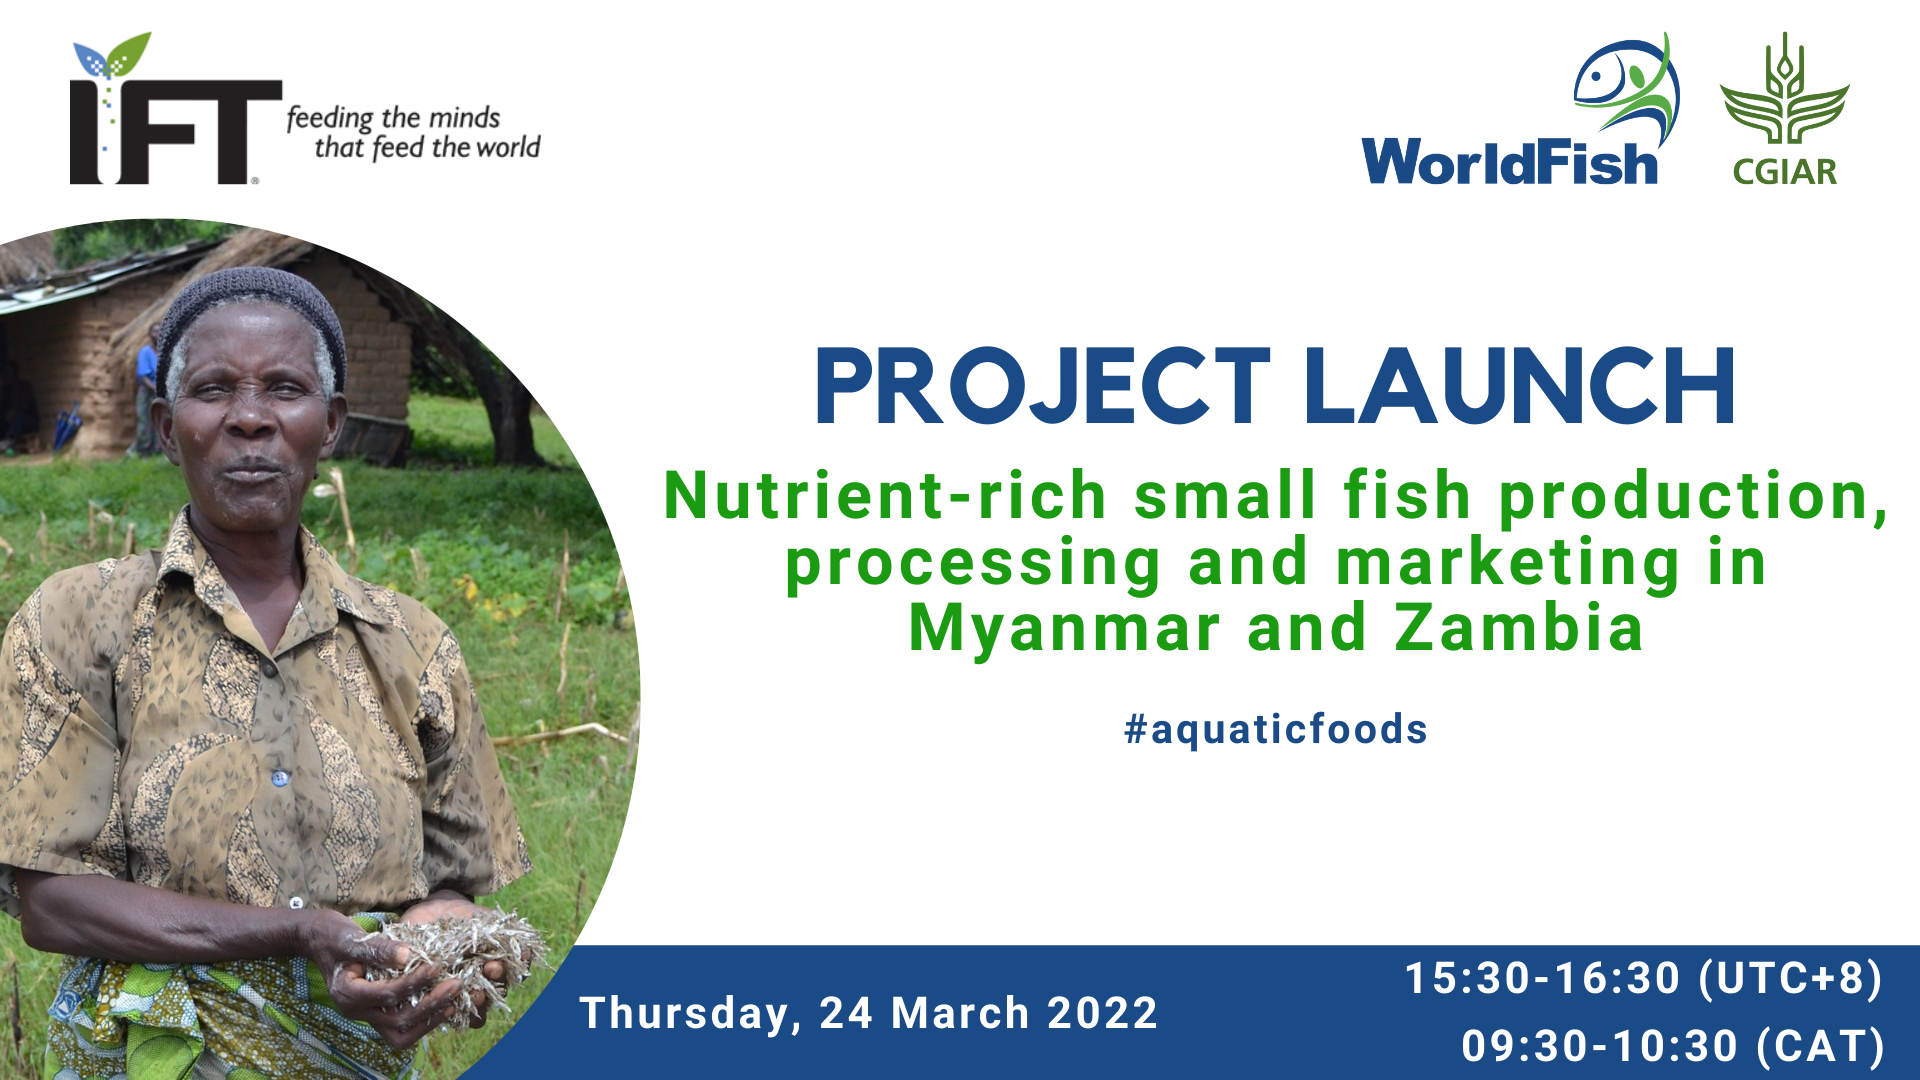 Project Launch: Nutrient-rich small fish production, processing and marketing in Myanmar and Zambia